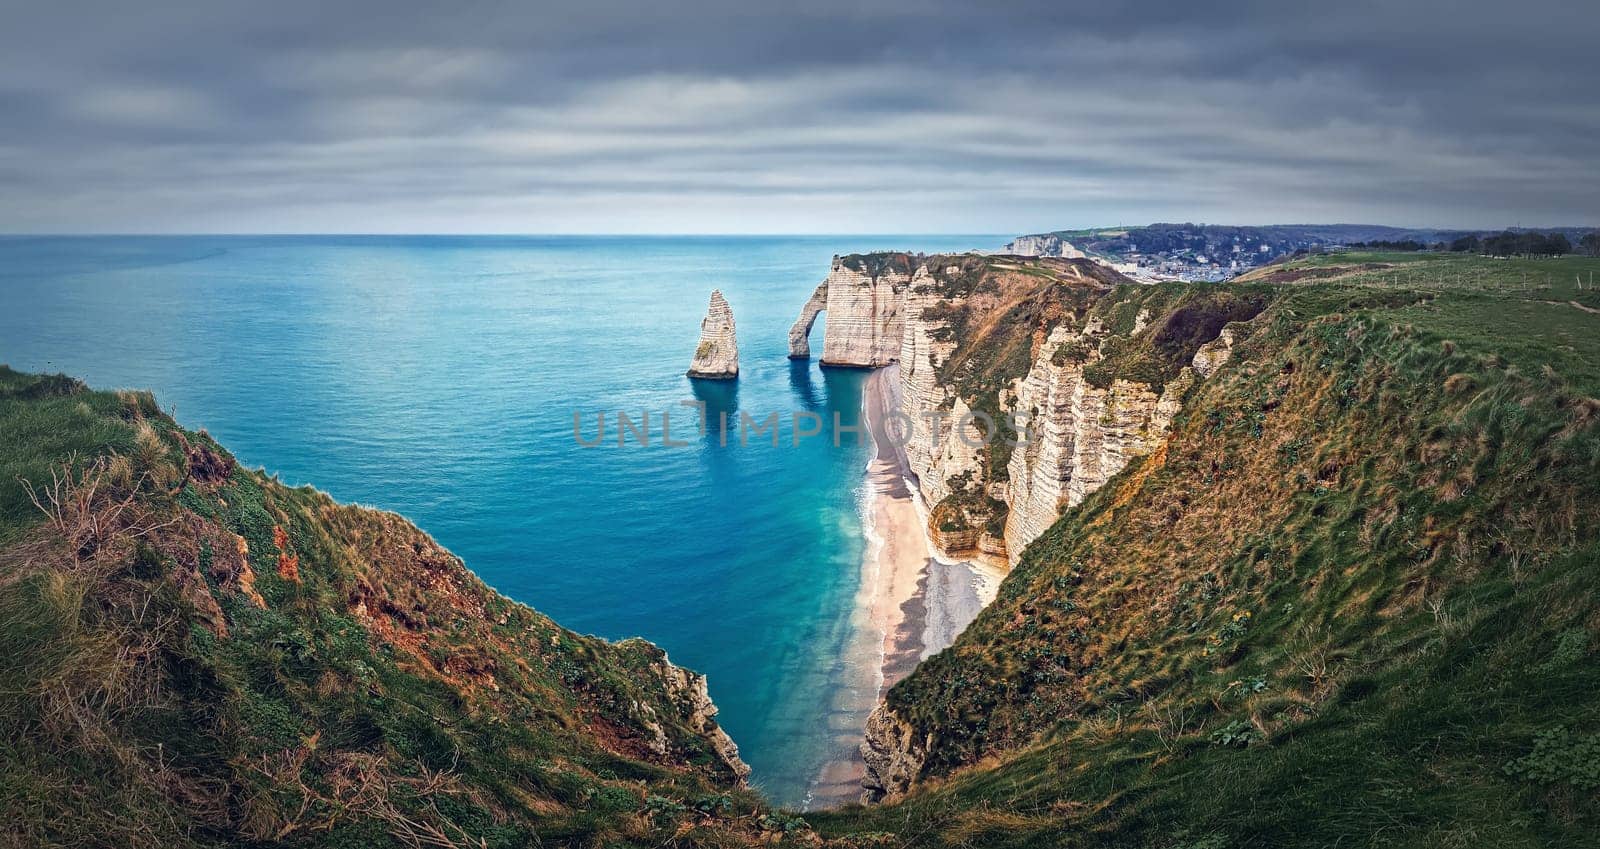 Falaise d'Aval limestone cliffs washed by La Manche channel waters. Beautiful coastline panorama with view to the famous rock Aiguille of Etretat in Normandy, France by psychoshadow